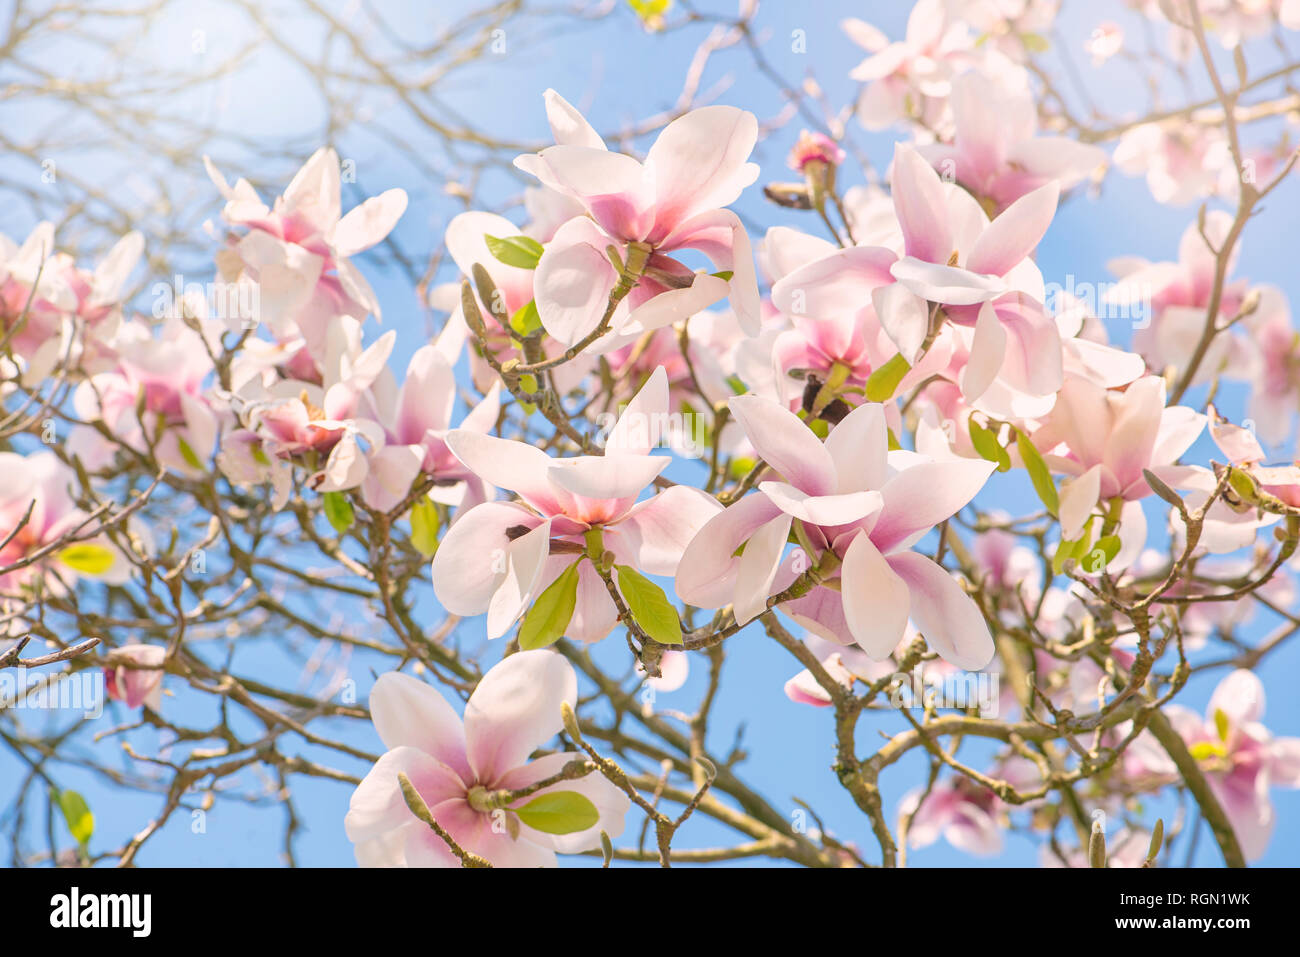 Close-up image of beautiful, pink, spring Magnolia flowers in the hazy sunshine Stock Photo